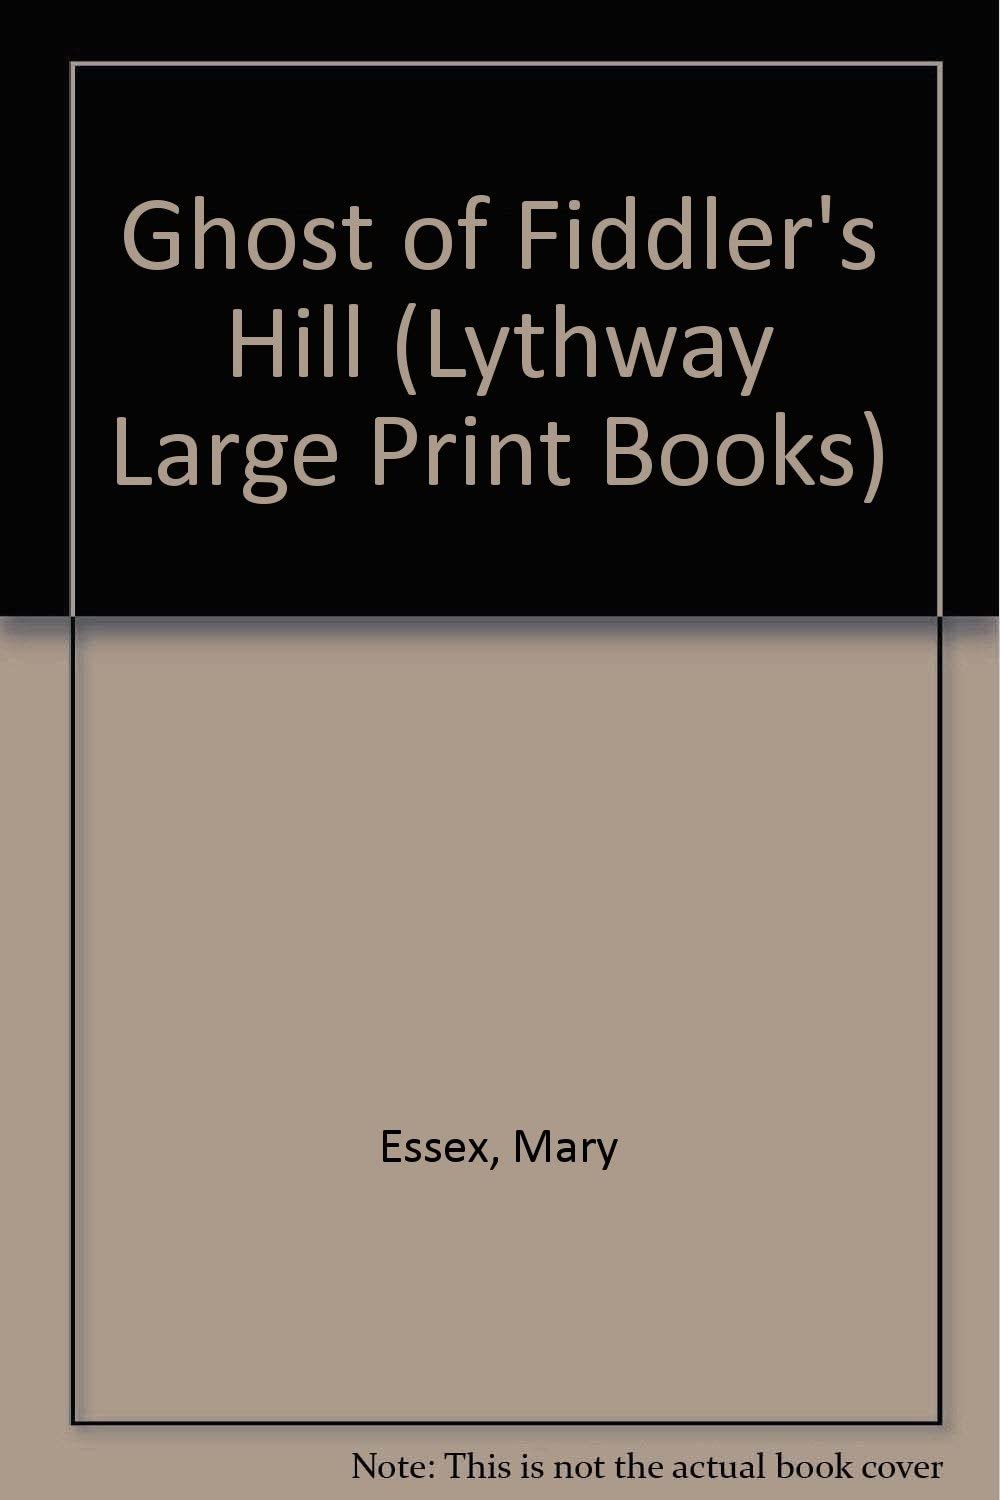 Ghost of Fiddler's Hill (Lythway Large Print Books)